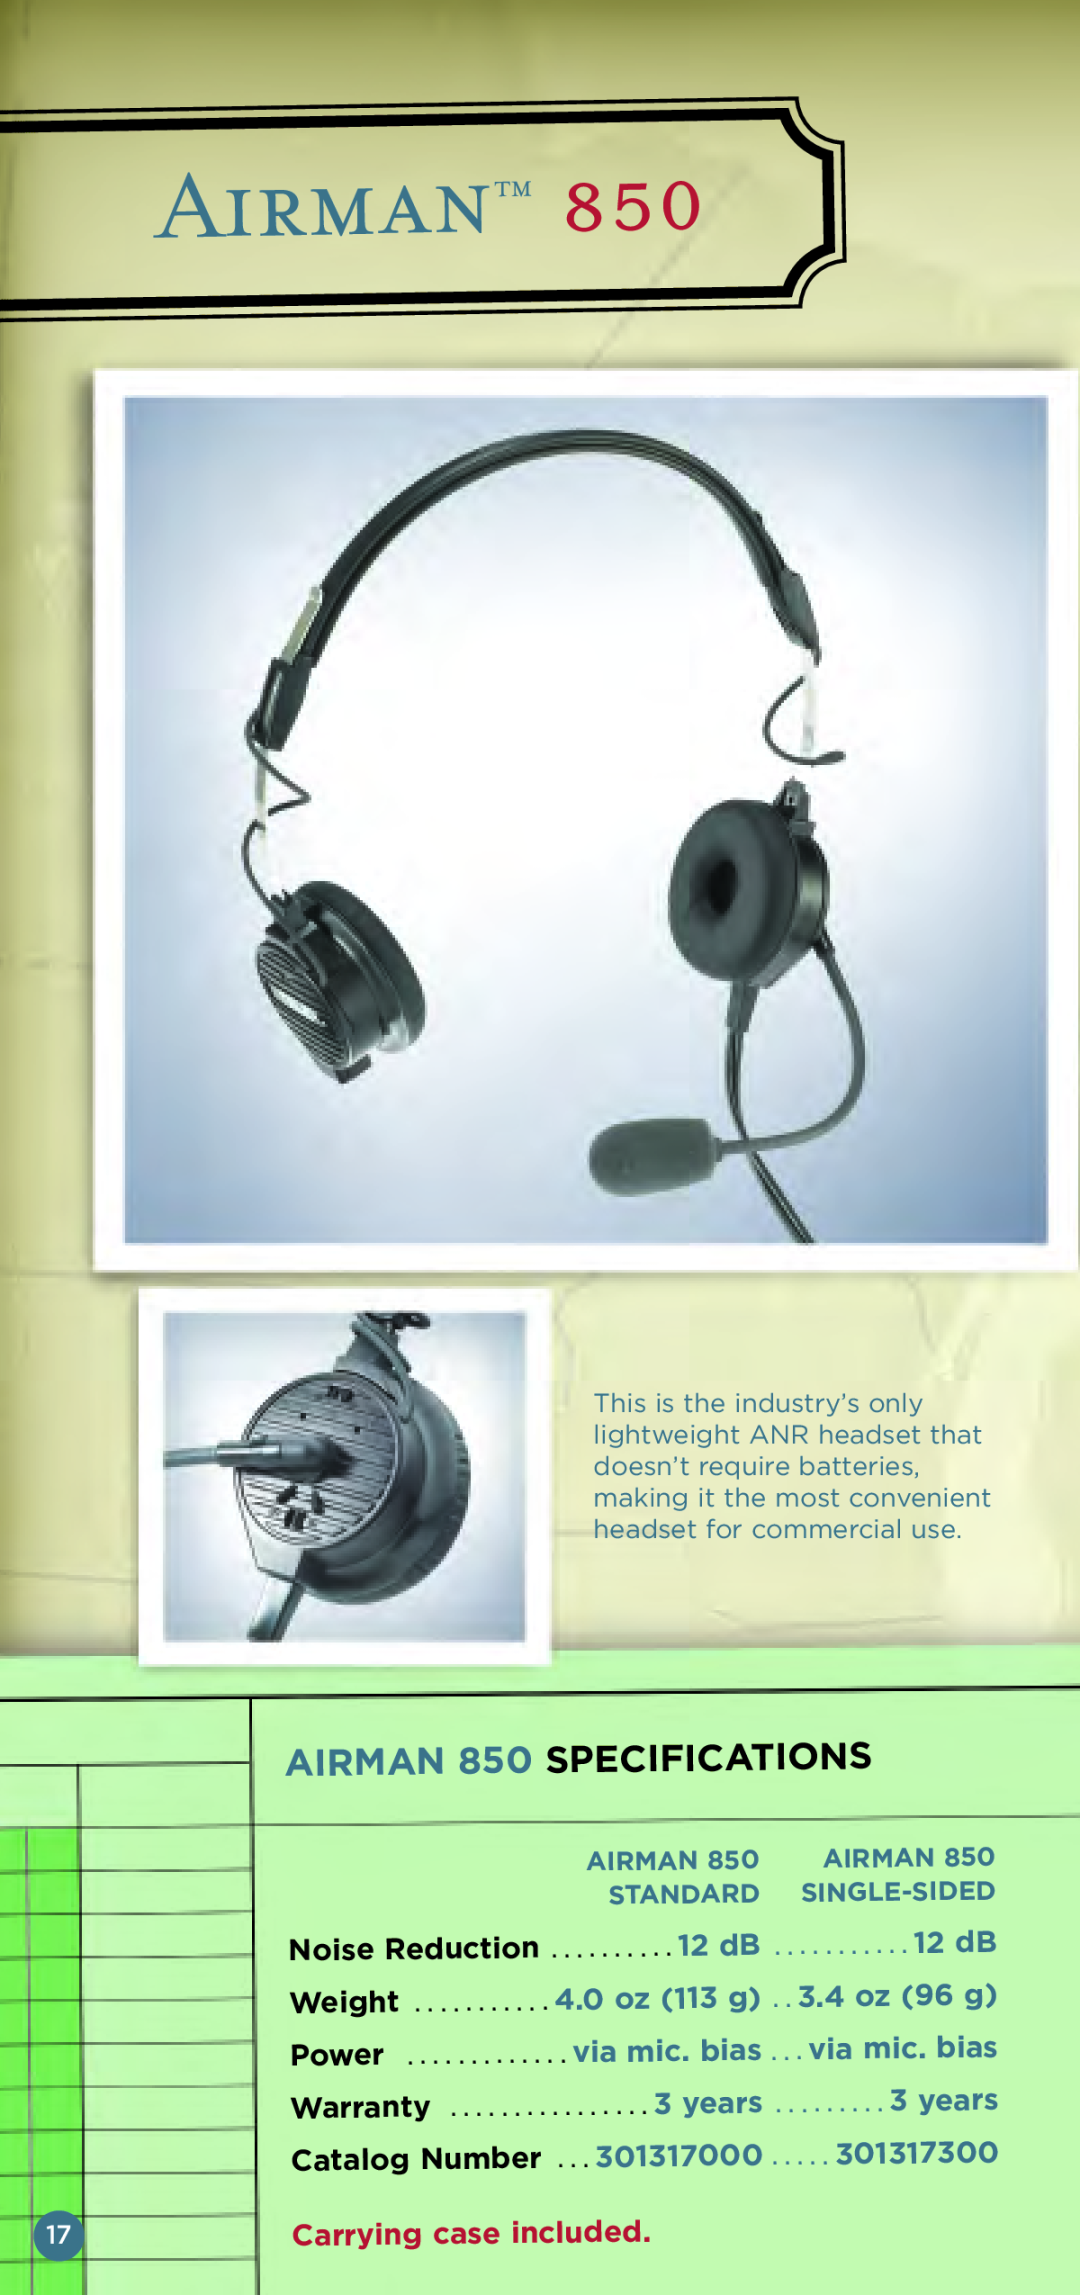 Telex Aviation Headsets Airman, AIRMAN 850 SPECIFICA, Tions, Noise Reduction, 4.0 oz 113 g, 3.4 oz 96 g, Catalog Number 